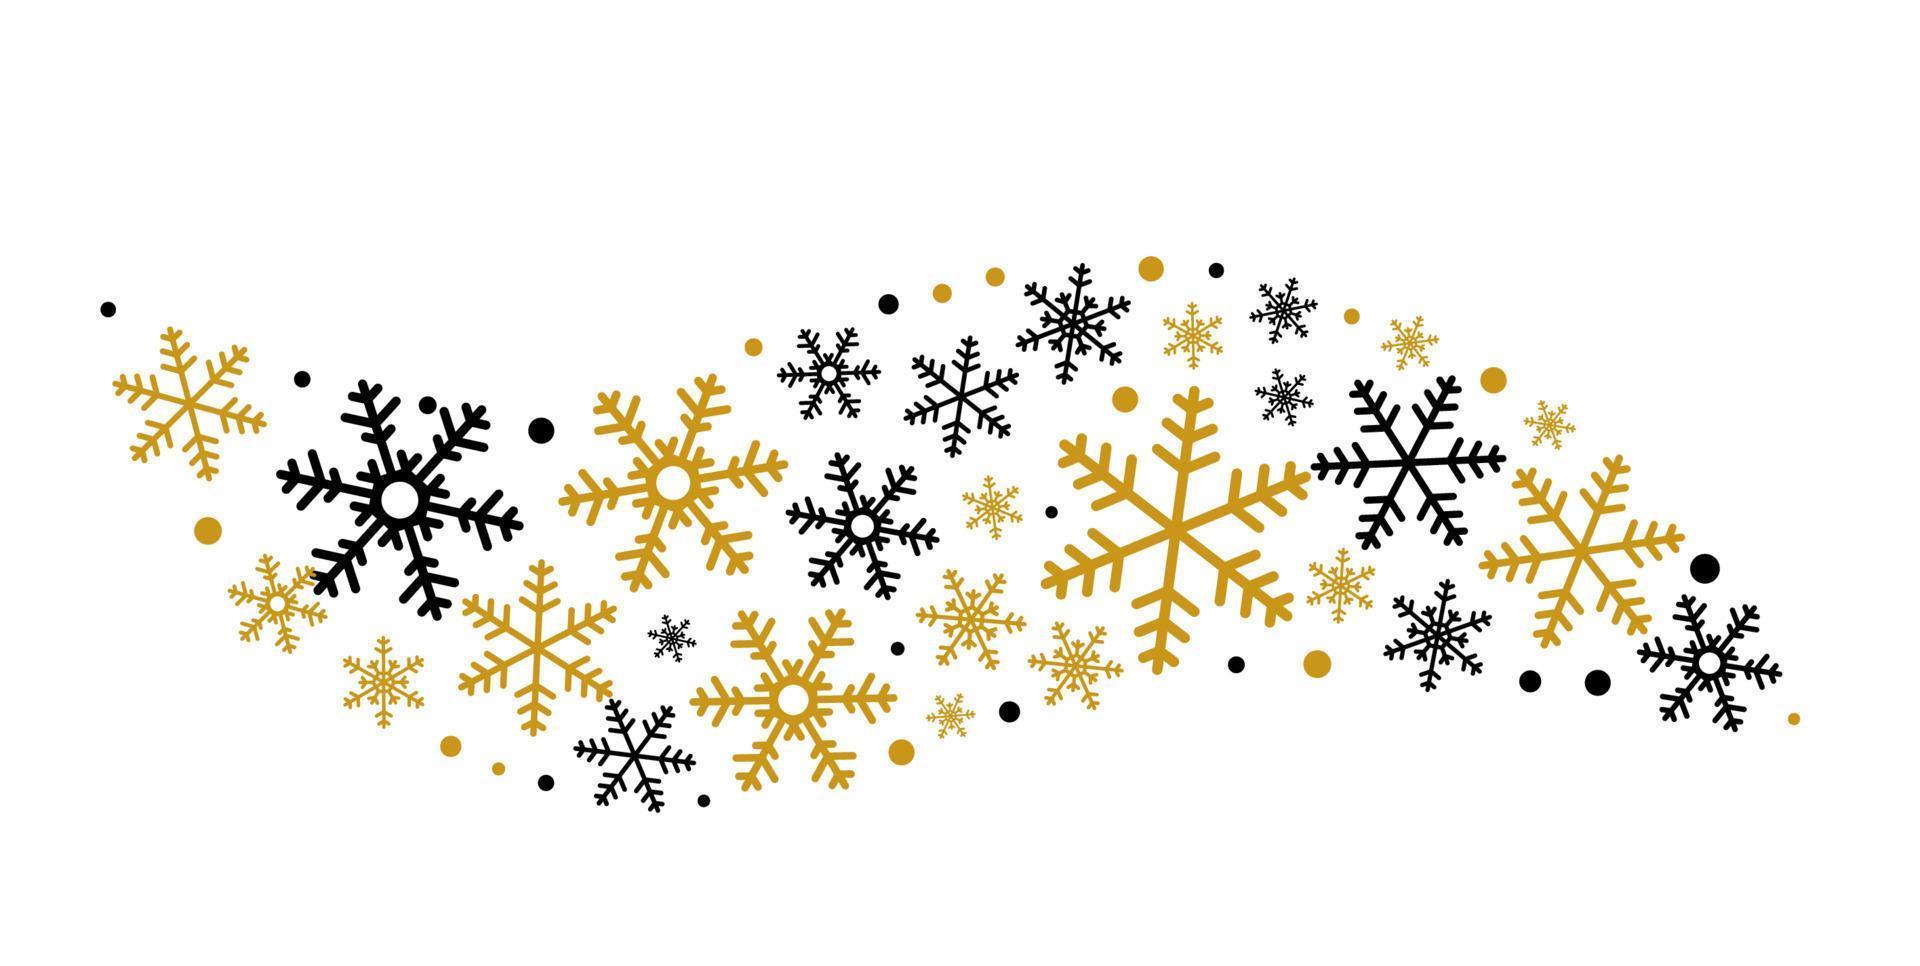 golden black snowflakes .Christmas greeting ornaments elements hanging isolated white background card vector